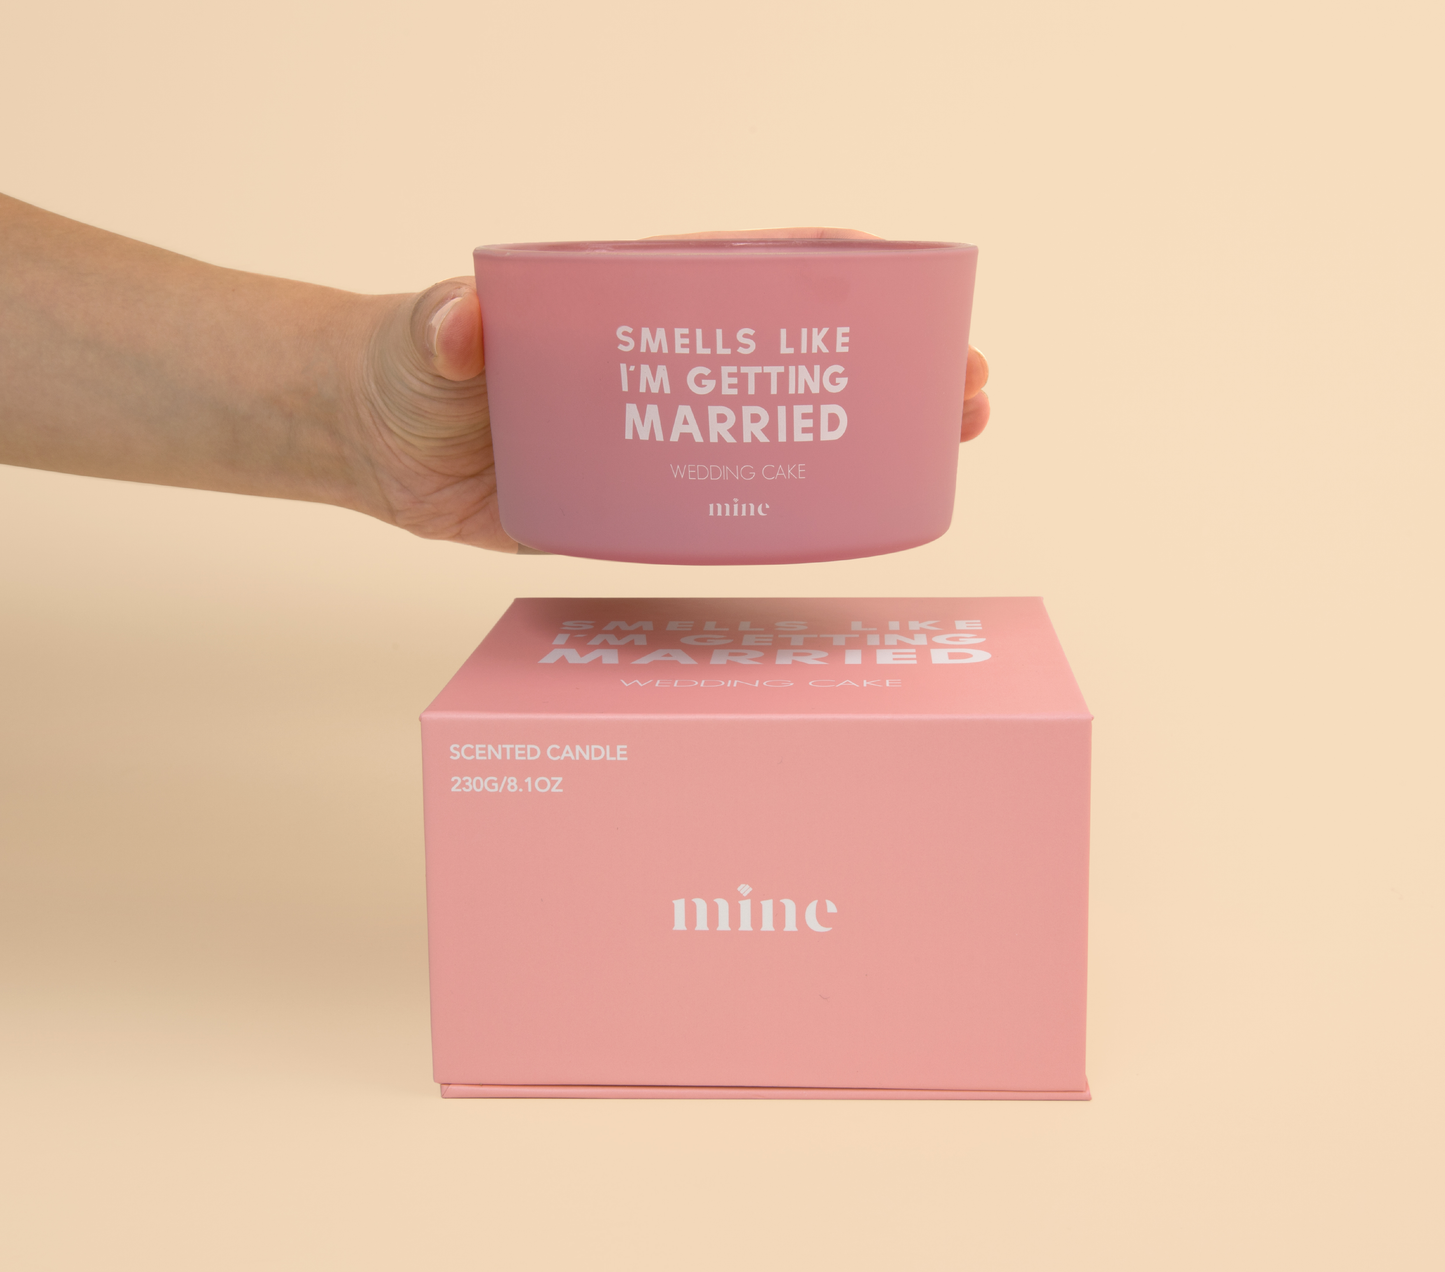 Wedding Cake Candle - The Mine Company - Smells Like I'm Getting Married - Pink Candle being held above gift box